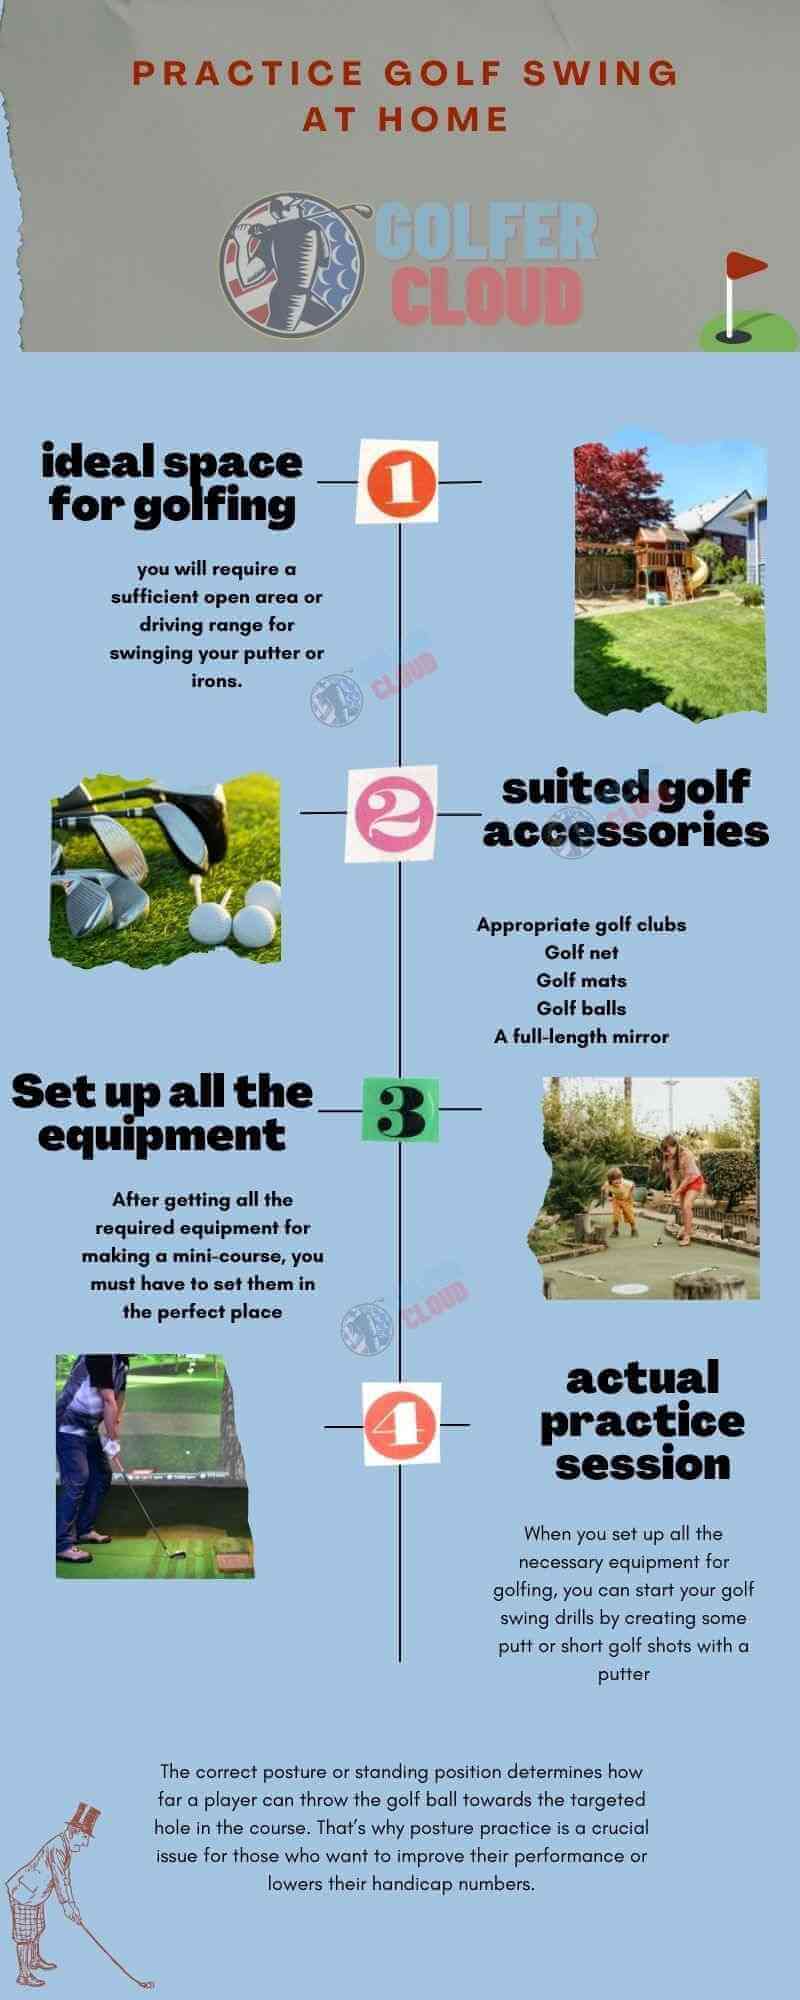 The image shows how to practice golf swing at home infographic